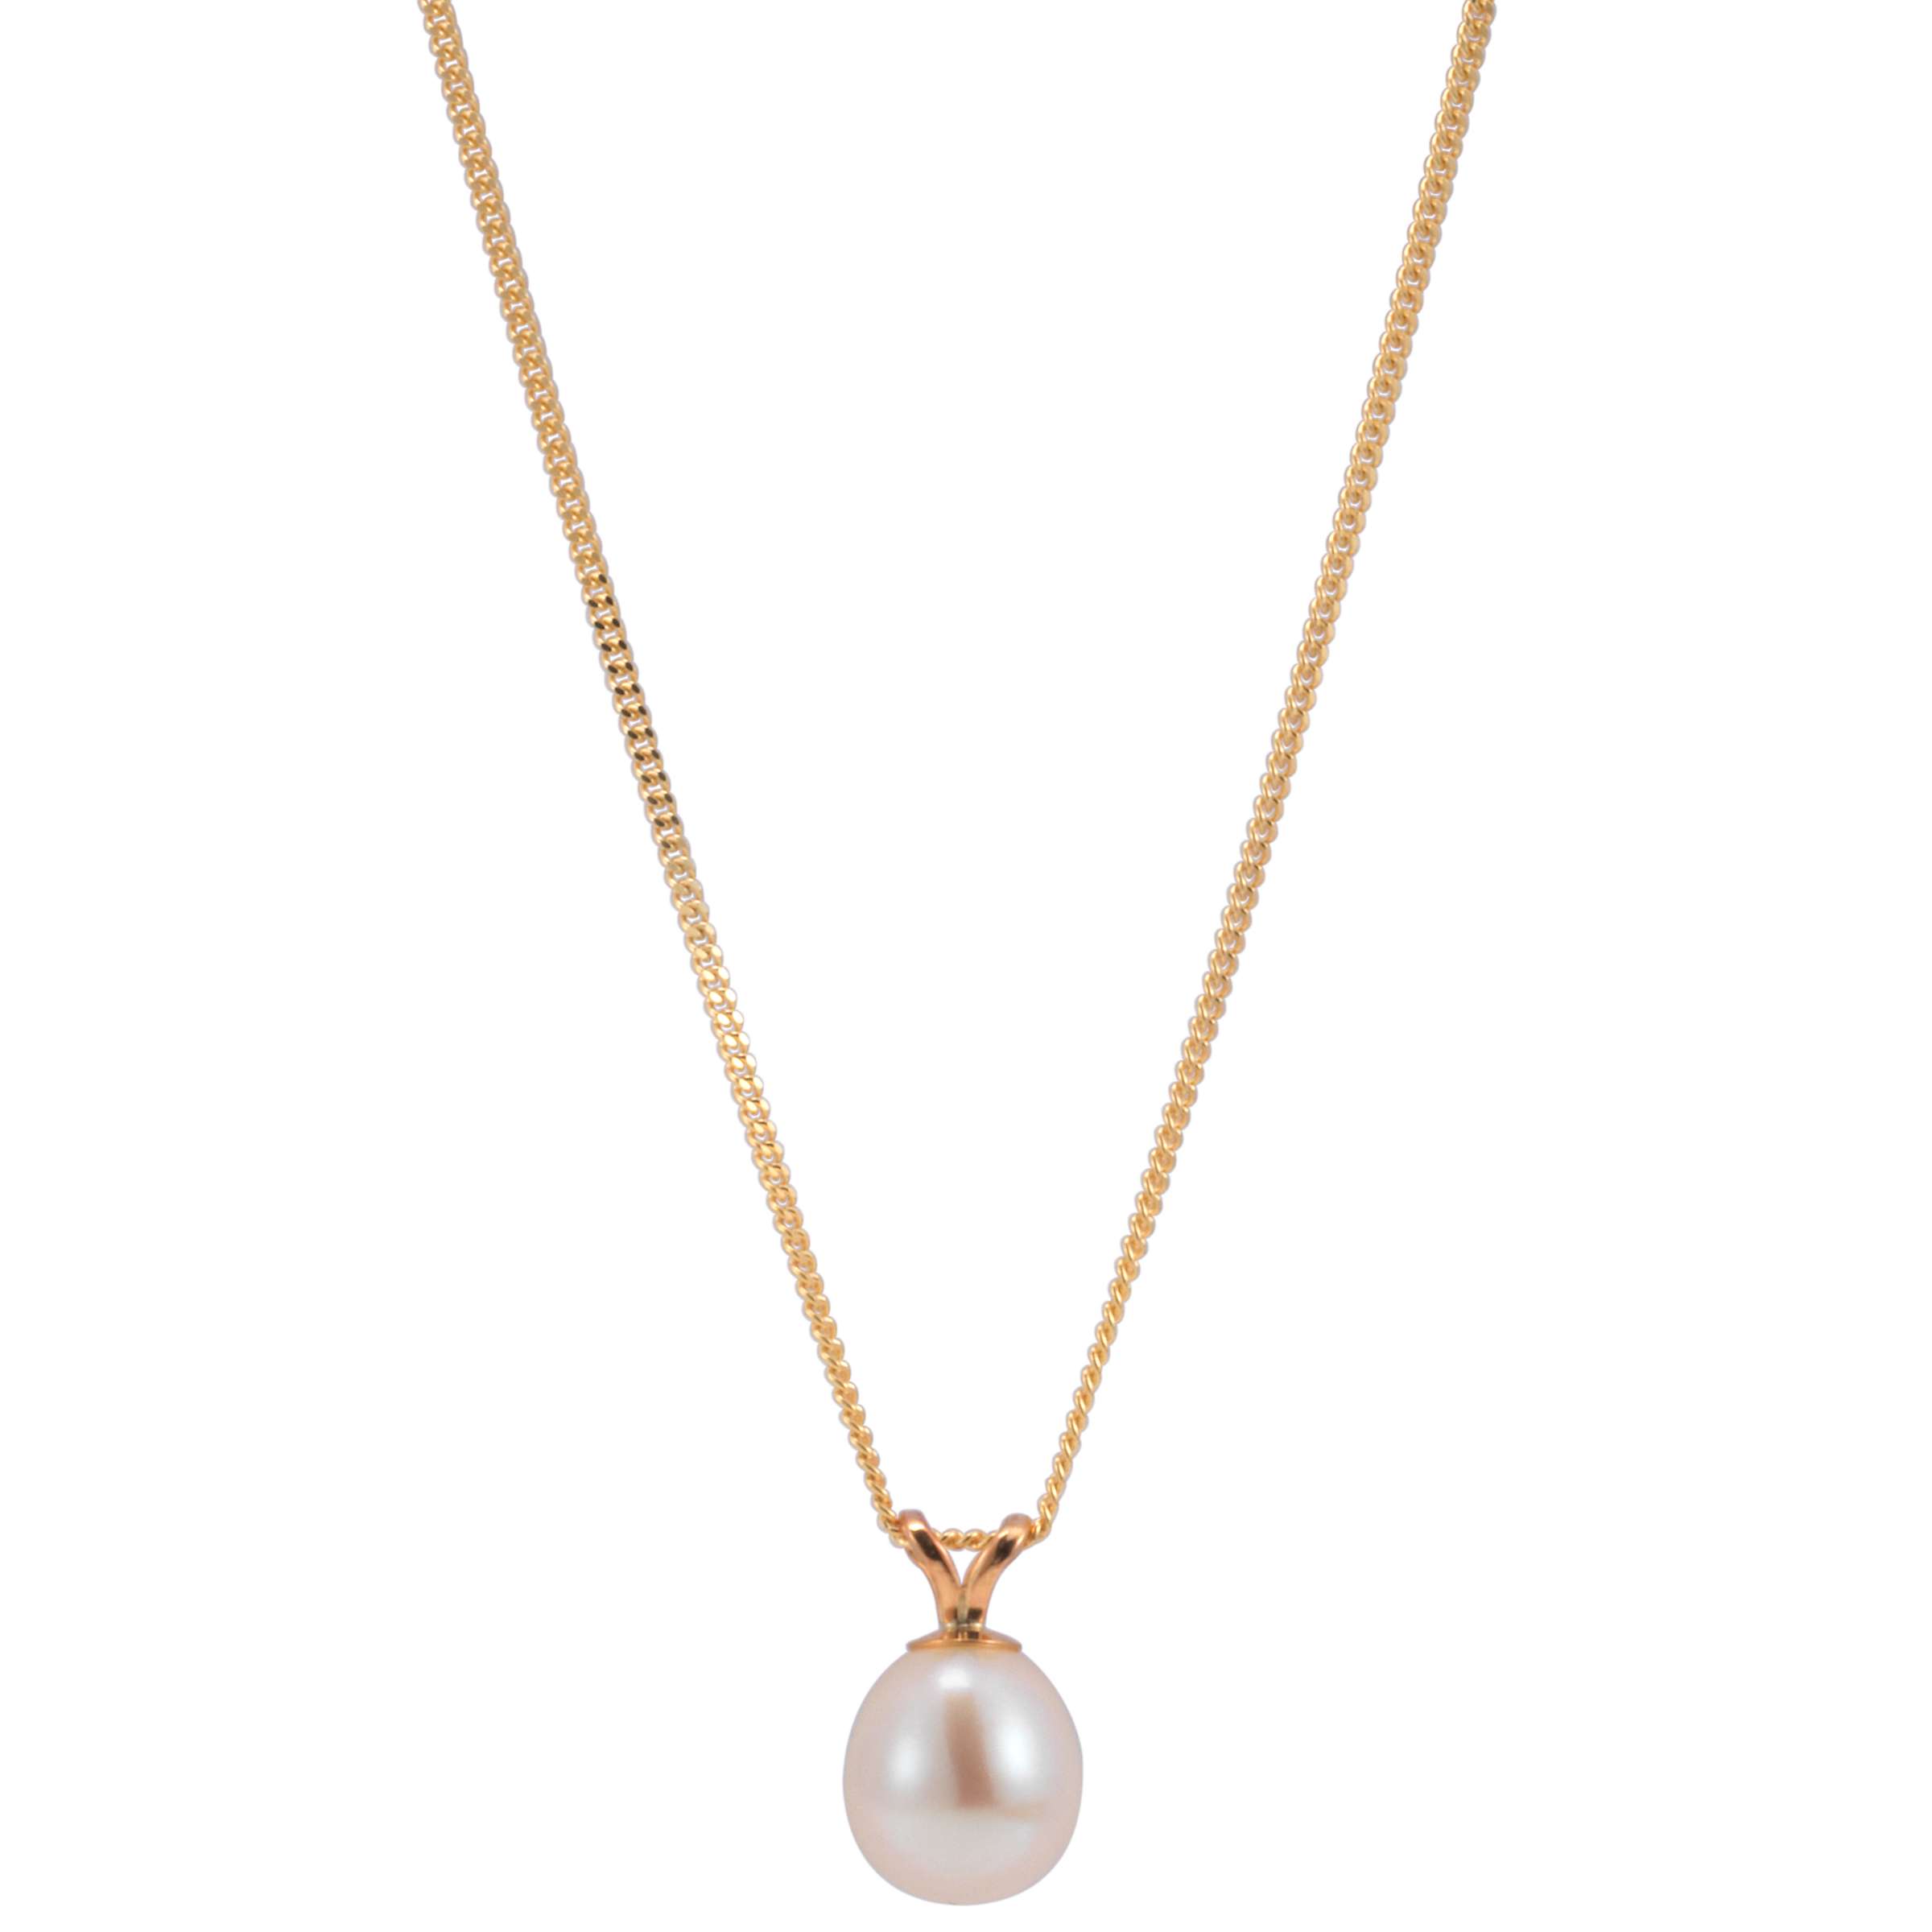 Buy A B Davis Freshwater Pearl Pendant Necklace, Gold/White Online at johnlewis.com